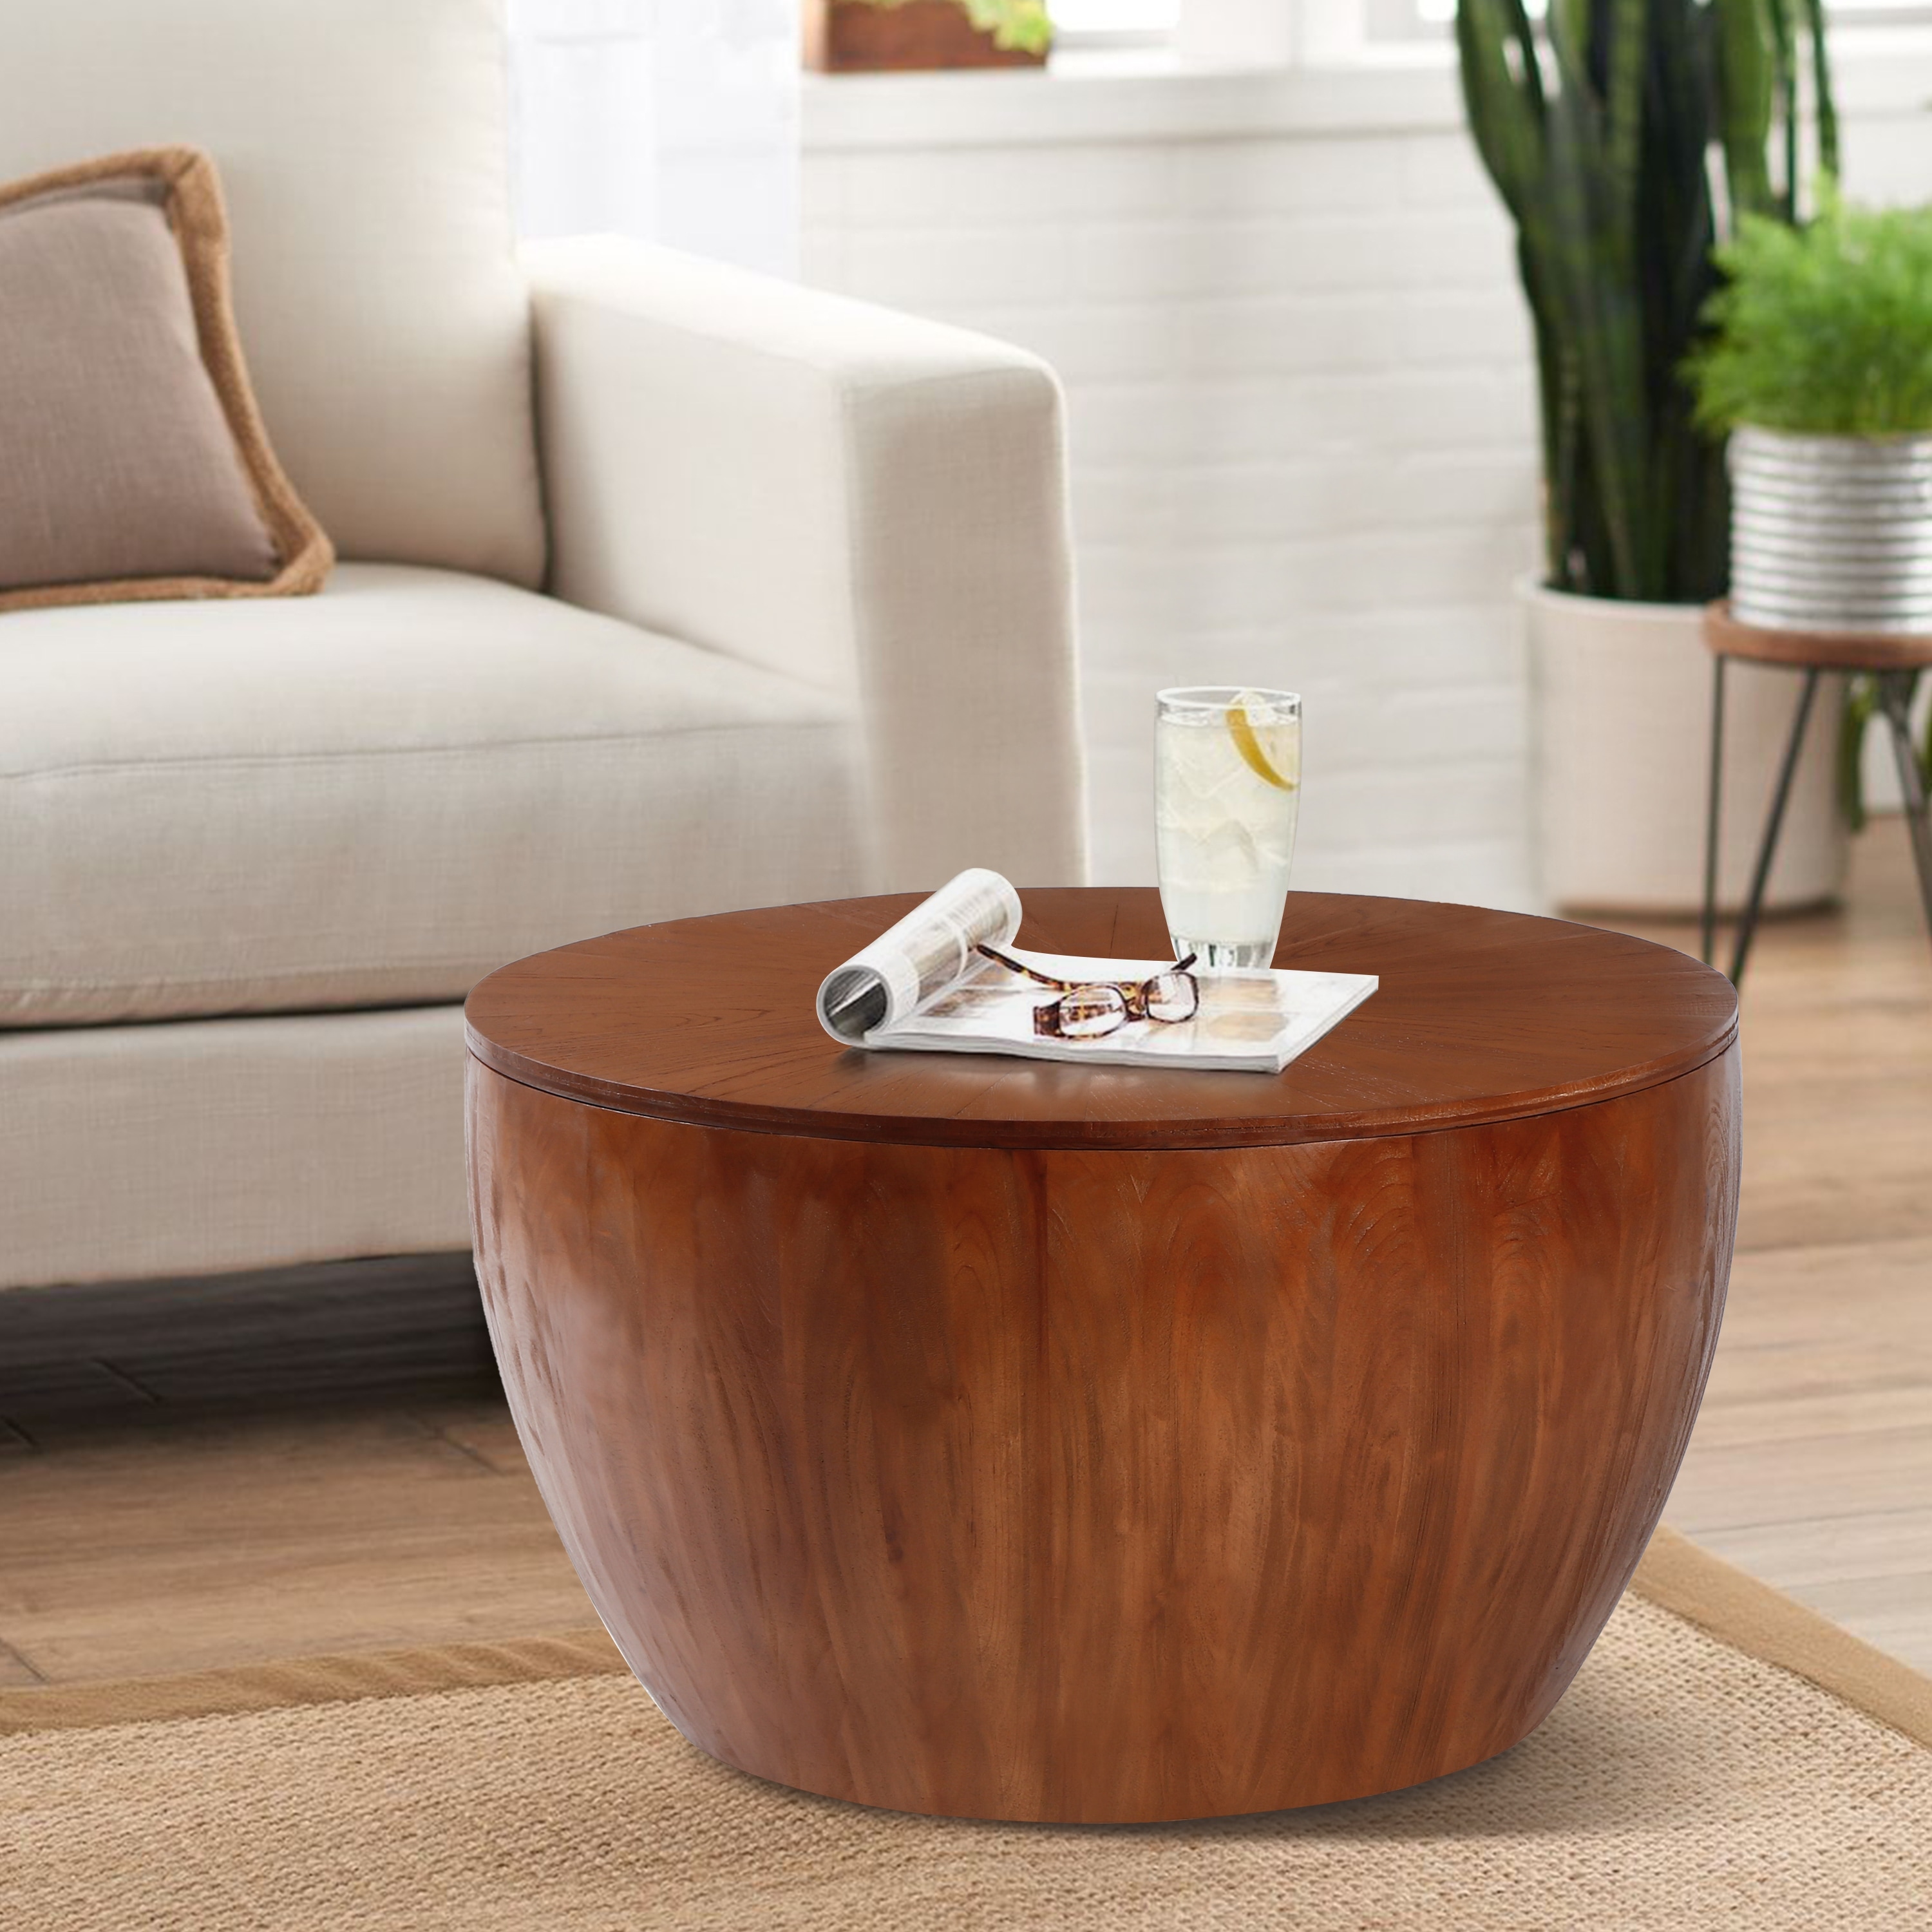 https://ak1.ostkcdn.com/images/products/is/images/direct/d5cfad145f956f0daa6306183cefc709df937589/Retro-Fashion-Style-Coffee-Table%2CSuitable-for-Living-Room%2COffice%2Cand-Dining-Room.jpg